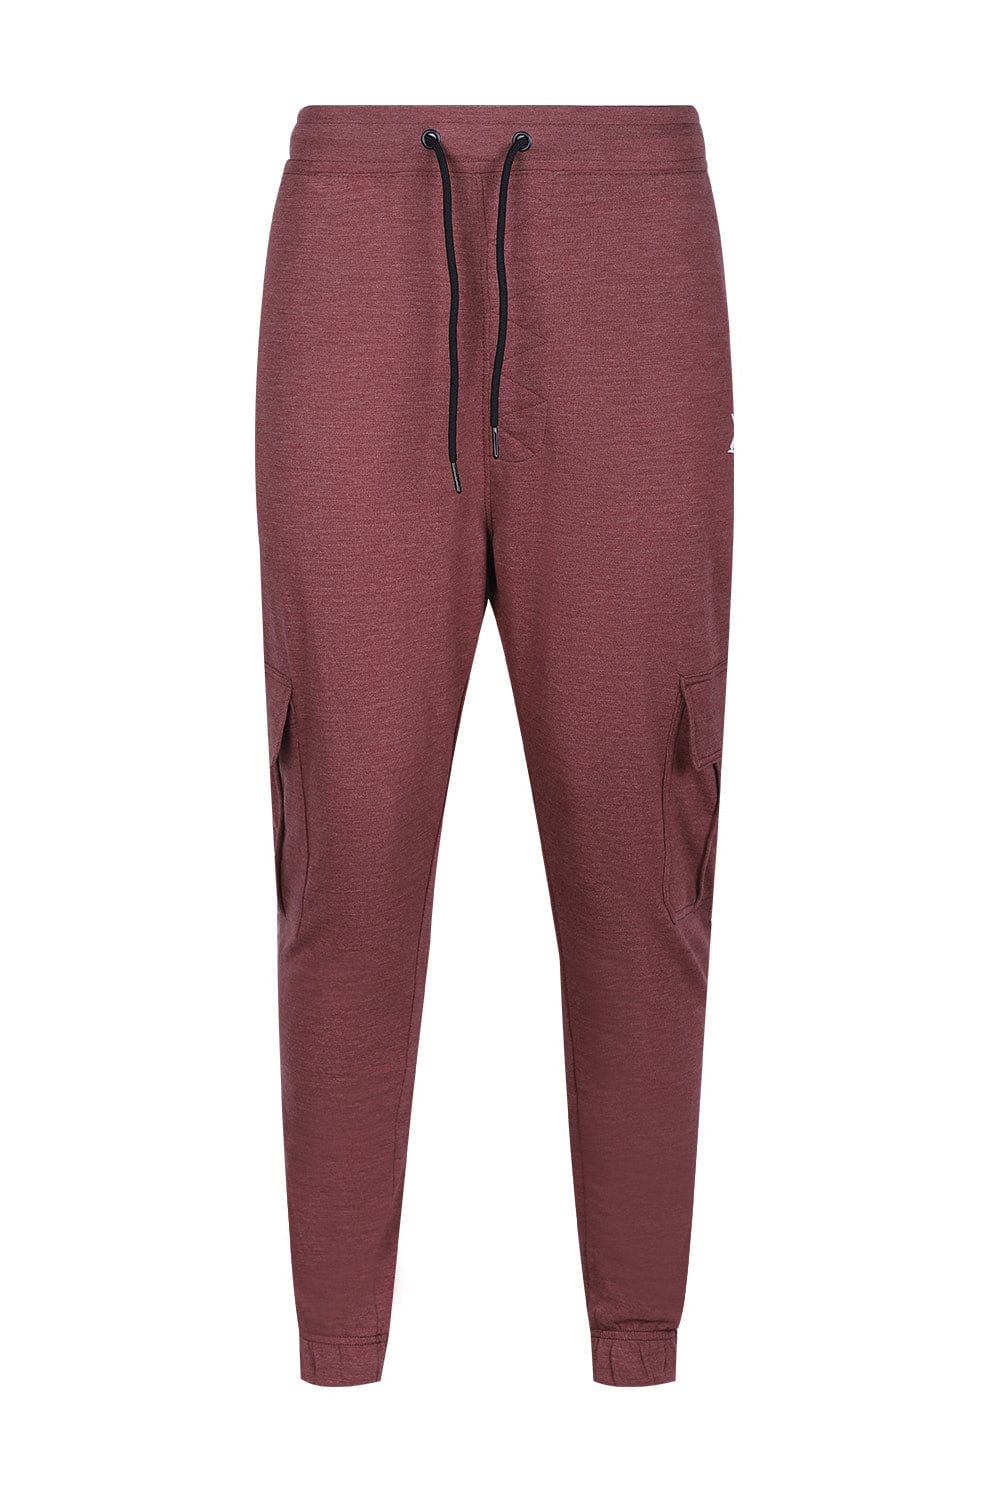 Hope Not Out by Shahid Afridi Men Trouser Knit Jogger Pants